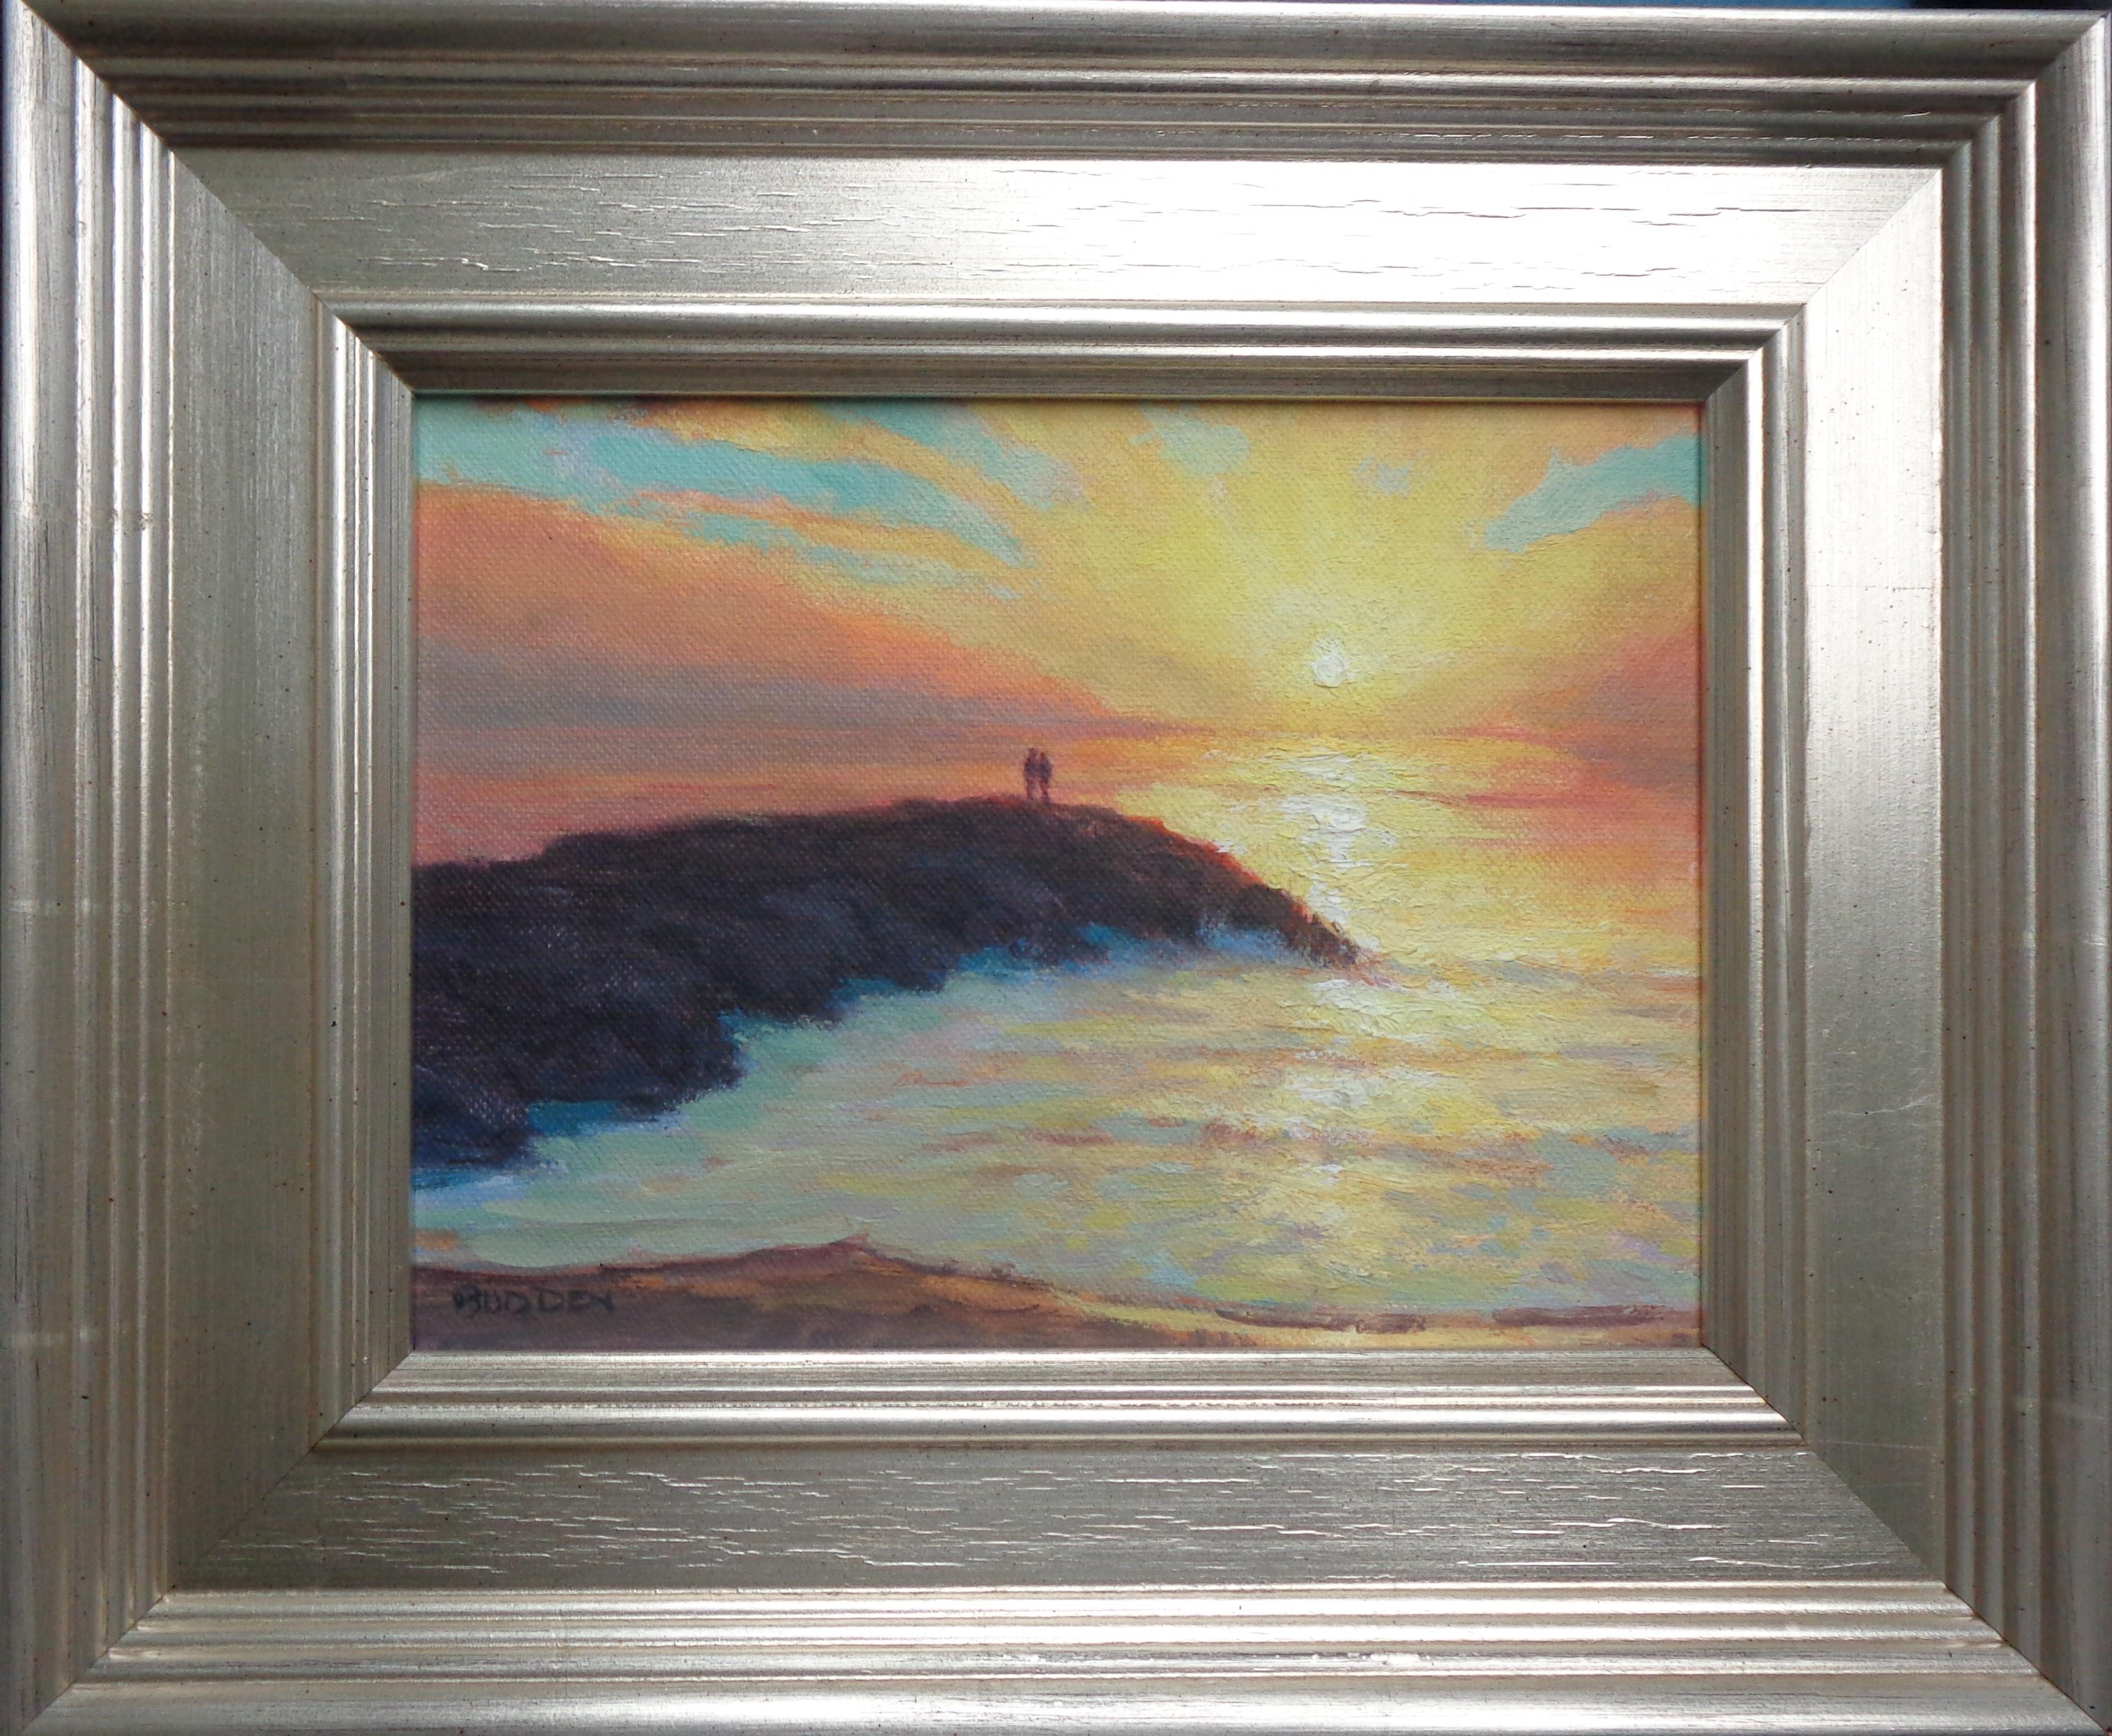 Sunrise Series Study is an oil painting on canvas panel by award winning contemporary artist Michael Budden that showcases a beautiful sunrise view of a seascape housed in an antiqued silver frame.  This painting is new and the image measures 6 x 8